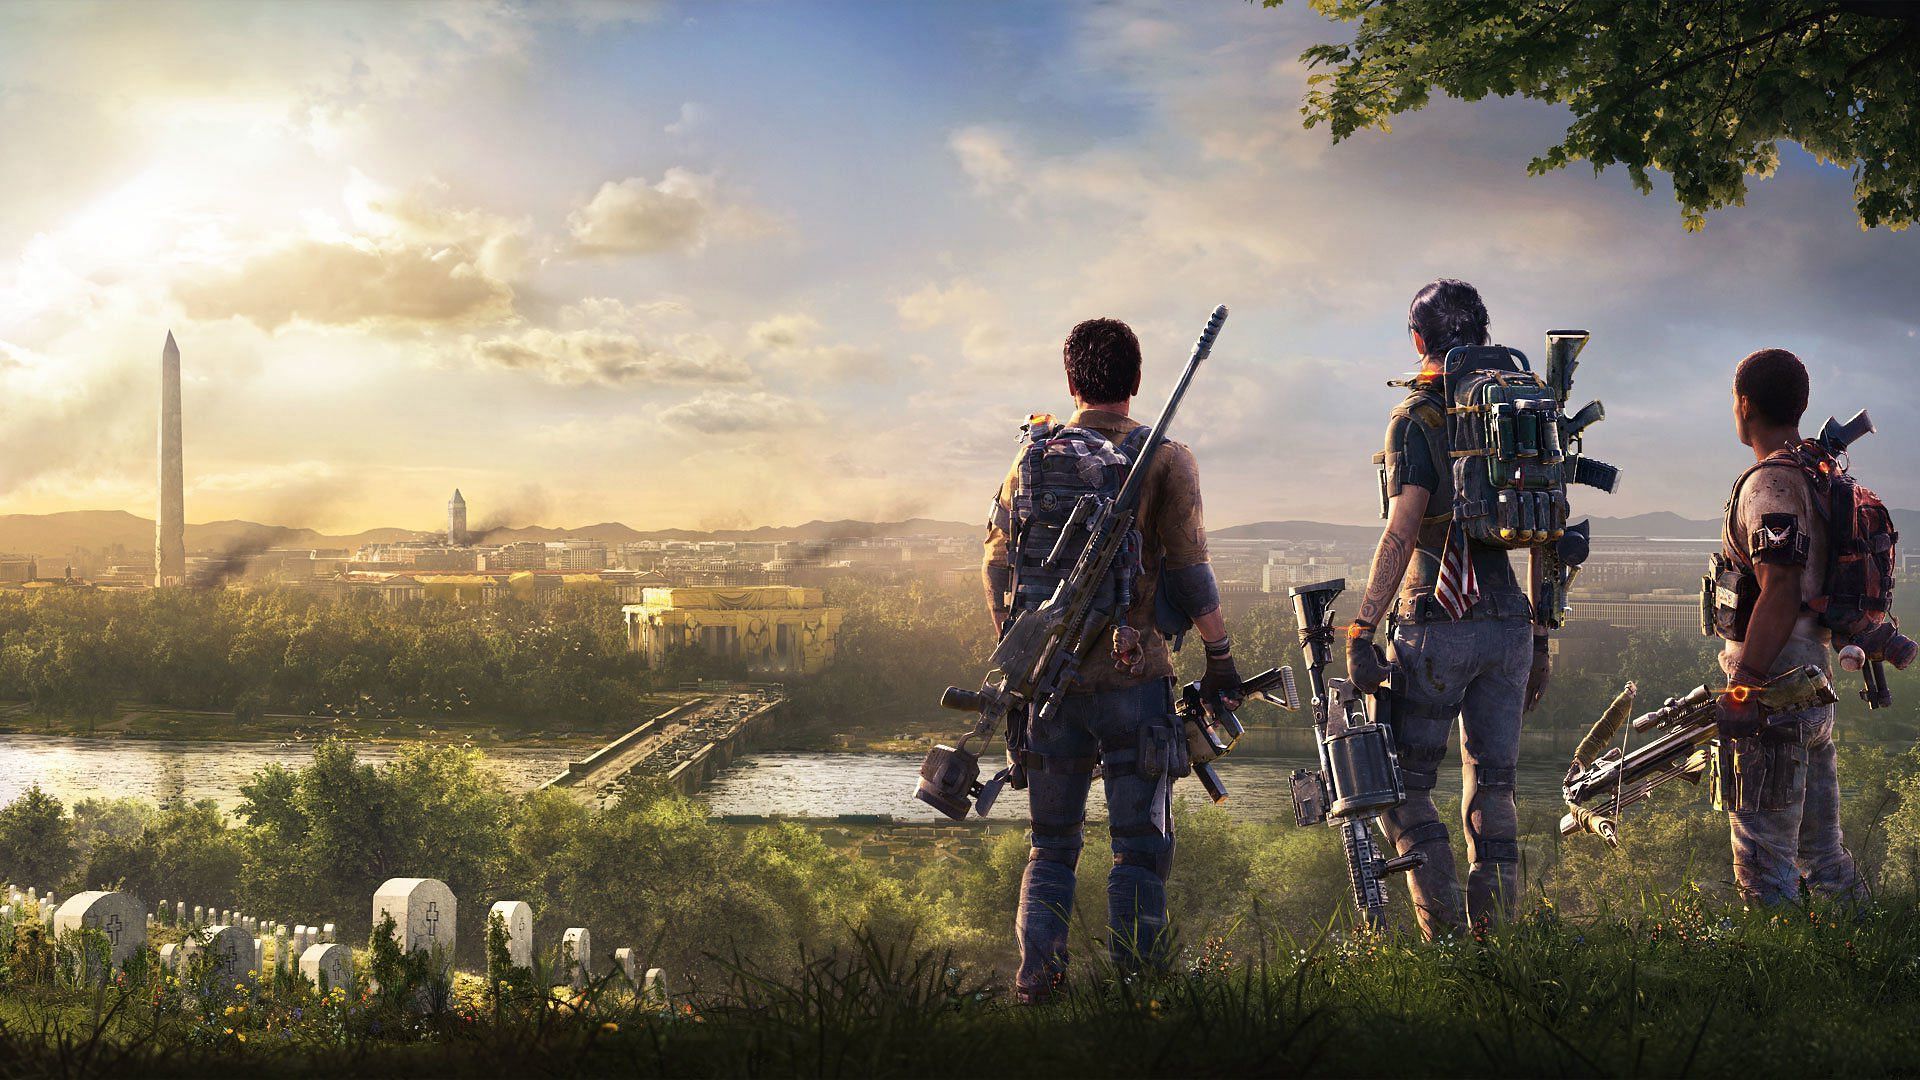 Chameleon, P416 and three other best Assault Rifles in The Division 2 (Image via Ubisoft)